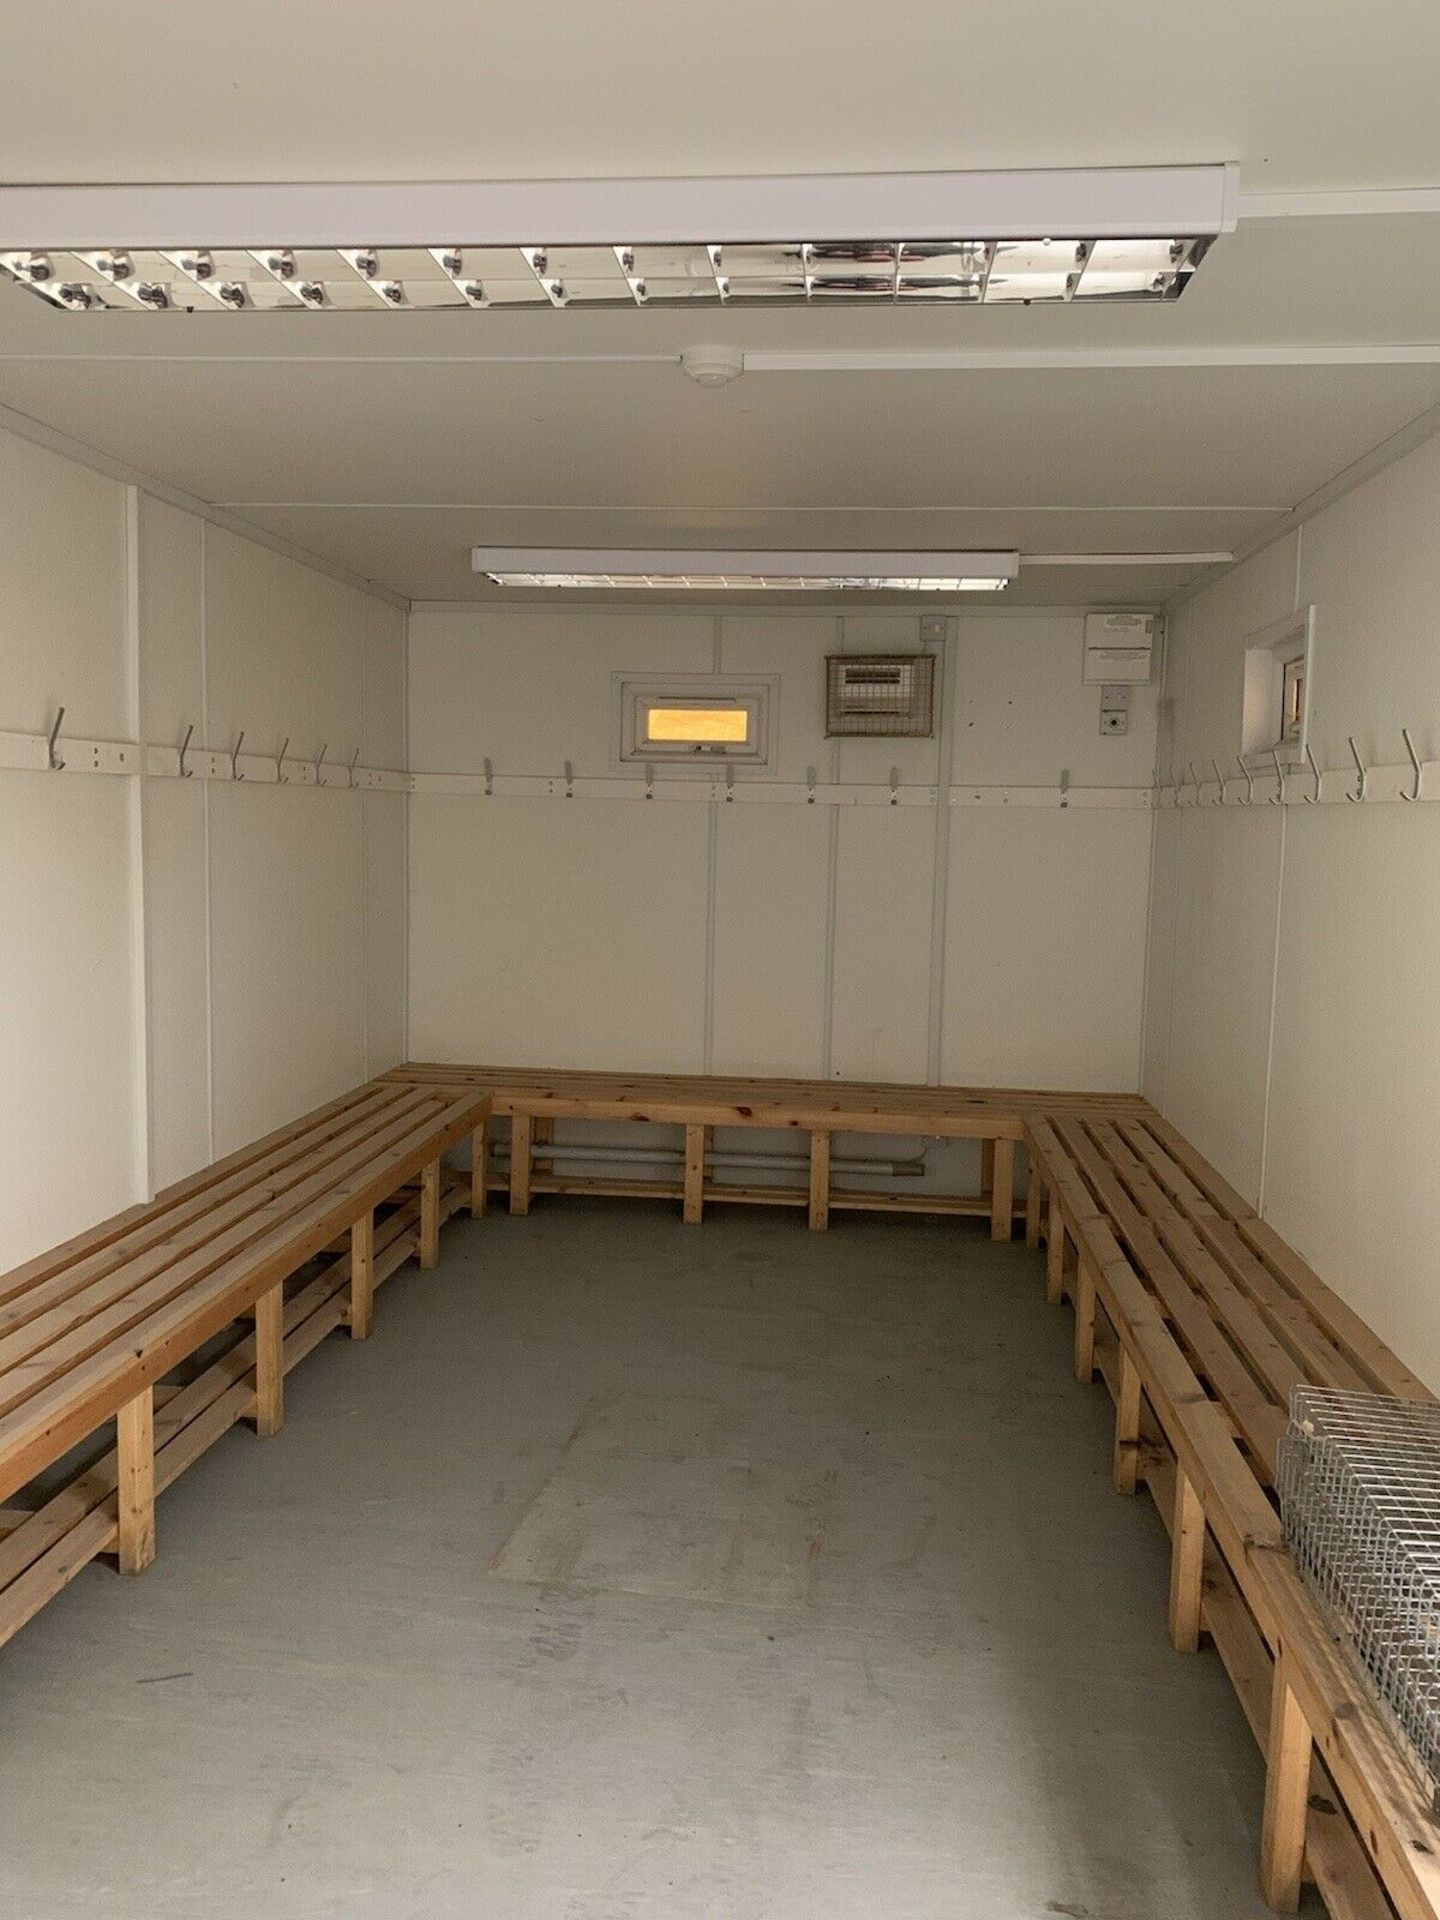 32ft Portable Toilet Block Drying Room Office Site - Image 8 of 11